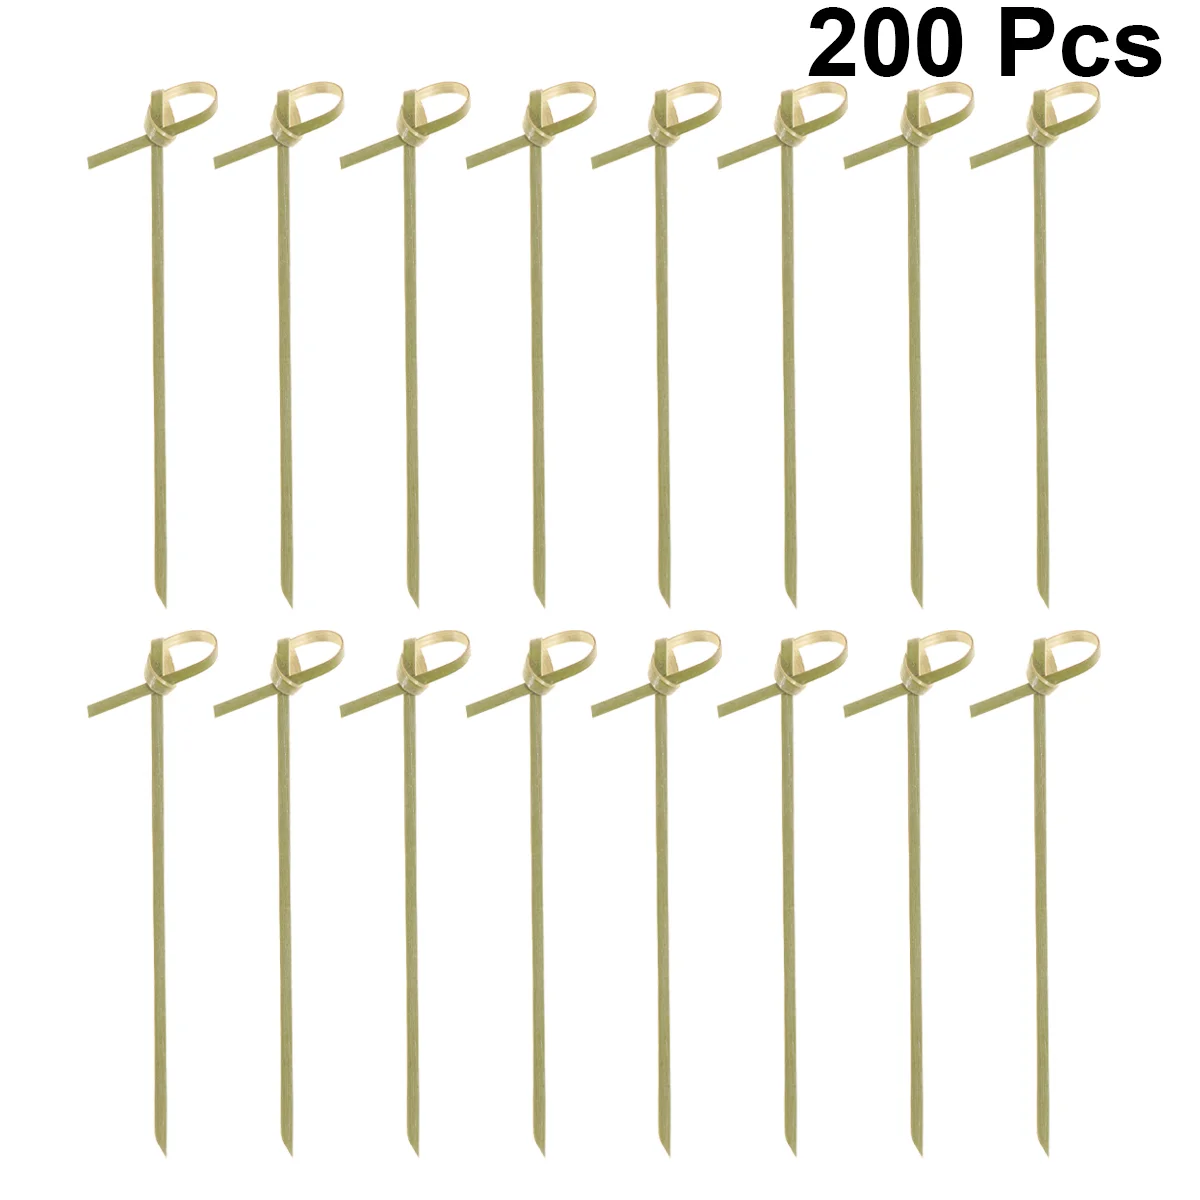 

200 Pcs Toothpick Skewers Cupcake Toppers Cocktail Stick Decorating Barbecue Bamboo Sticks Fruit Food Picks Sandwich Toothpicks